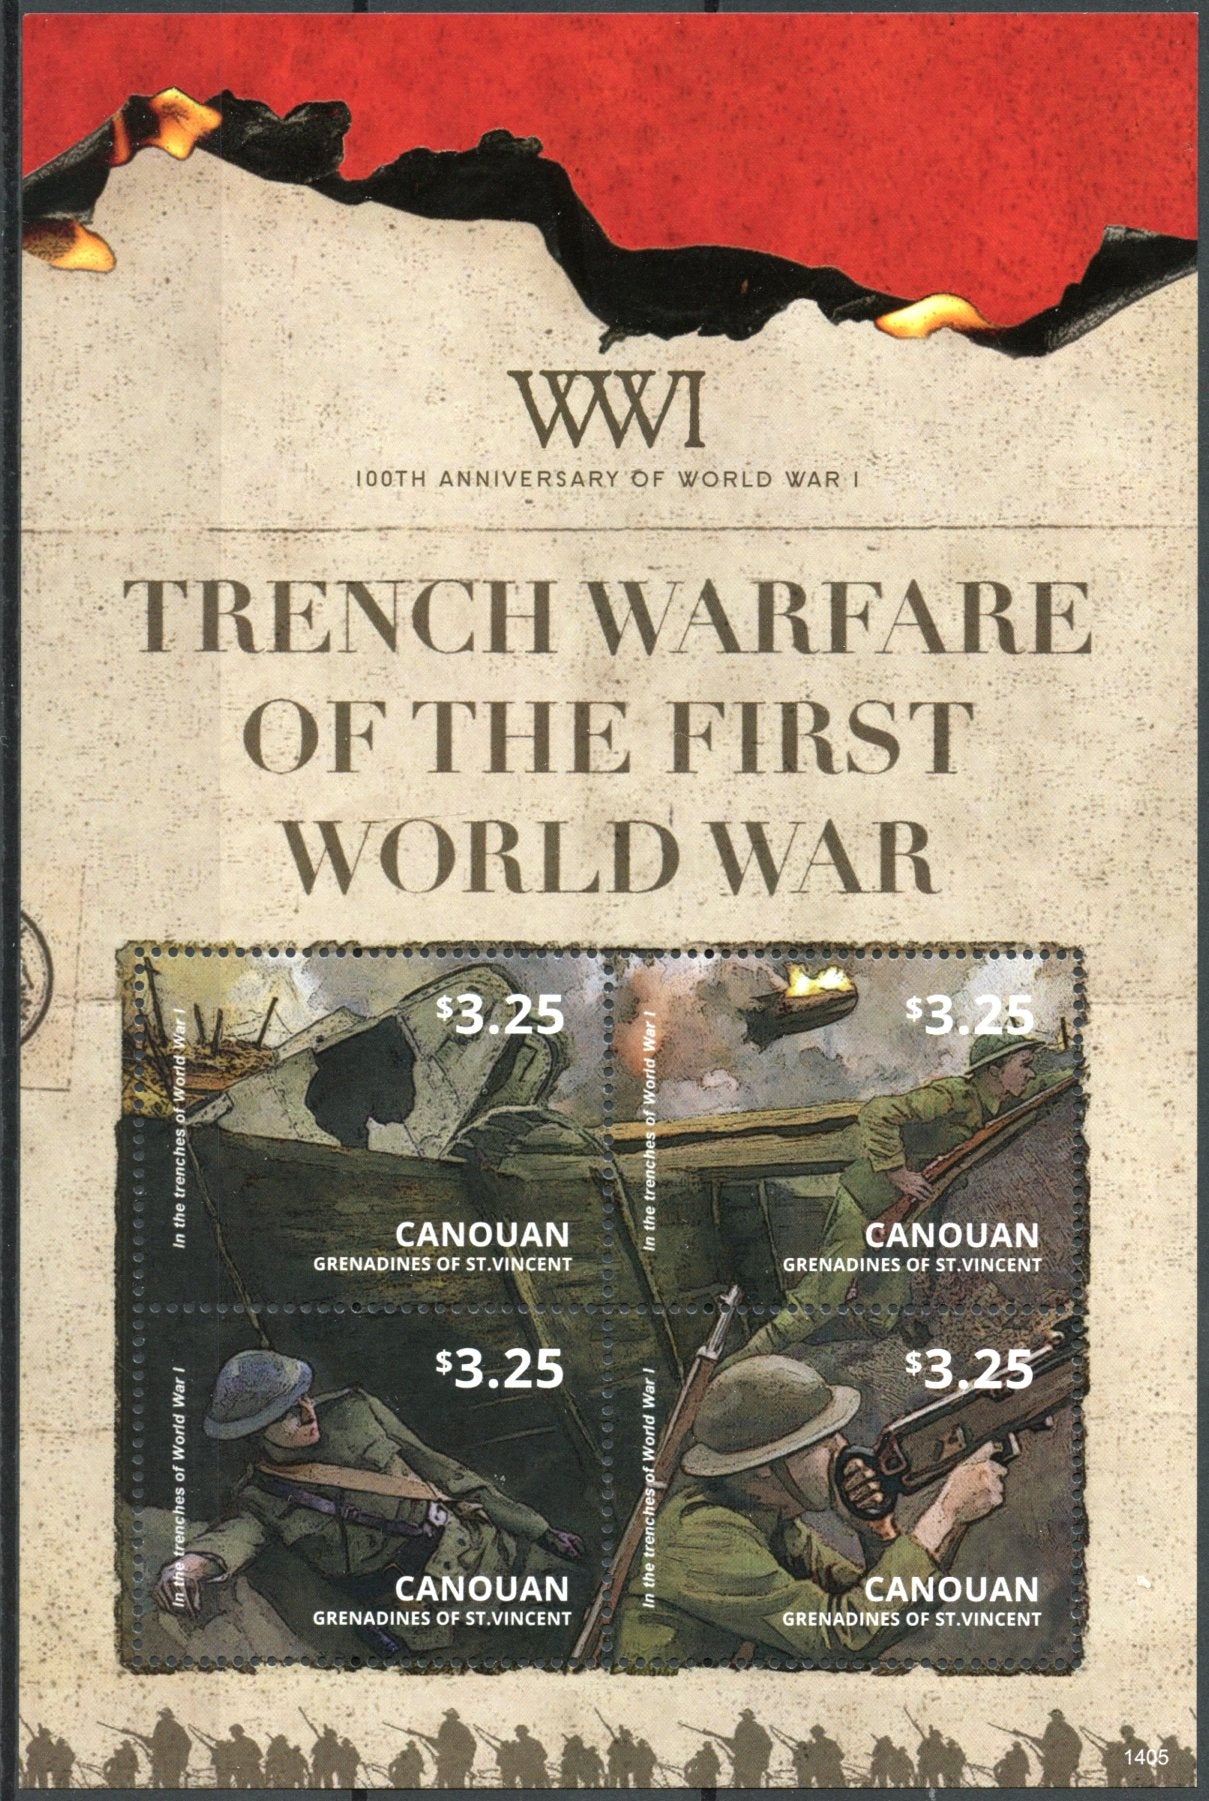 Canouan Grenadines St Vincent 2014 MNH WWI WW1 Trench Warfare 4v M/S Stamps